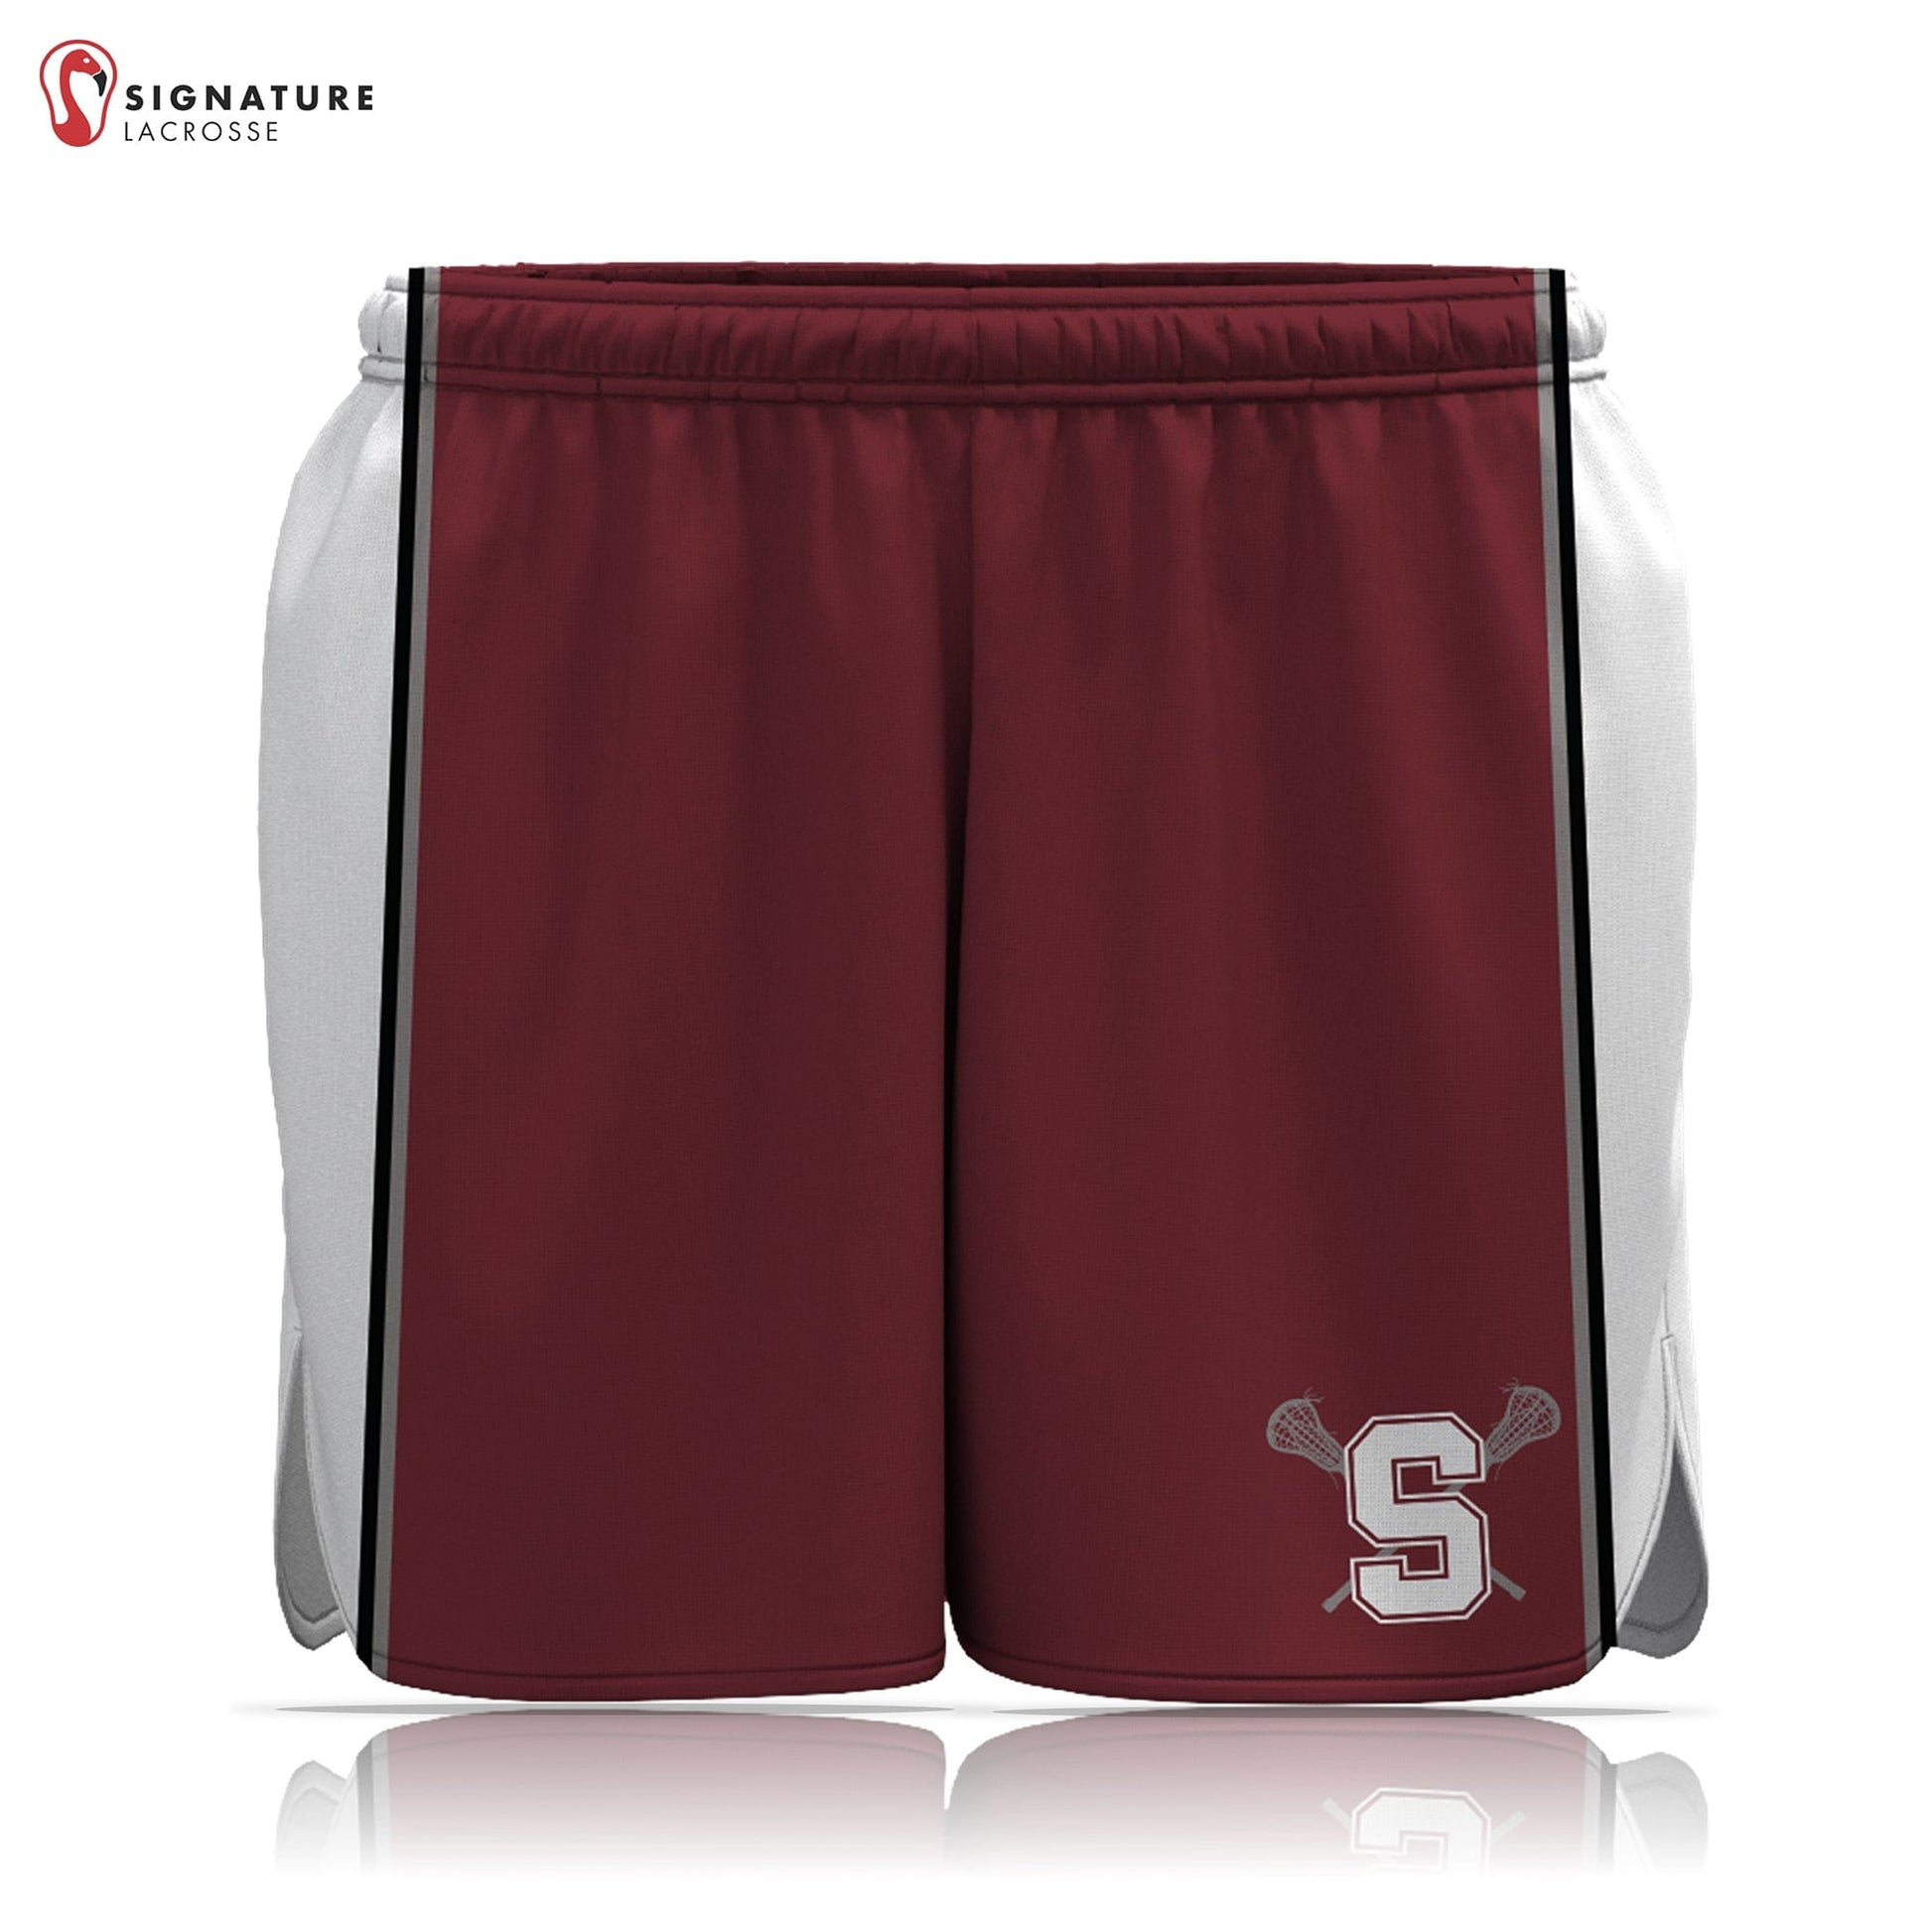 State College Women's Player Game Shorts: 7-8 Signature Lacrosse